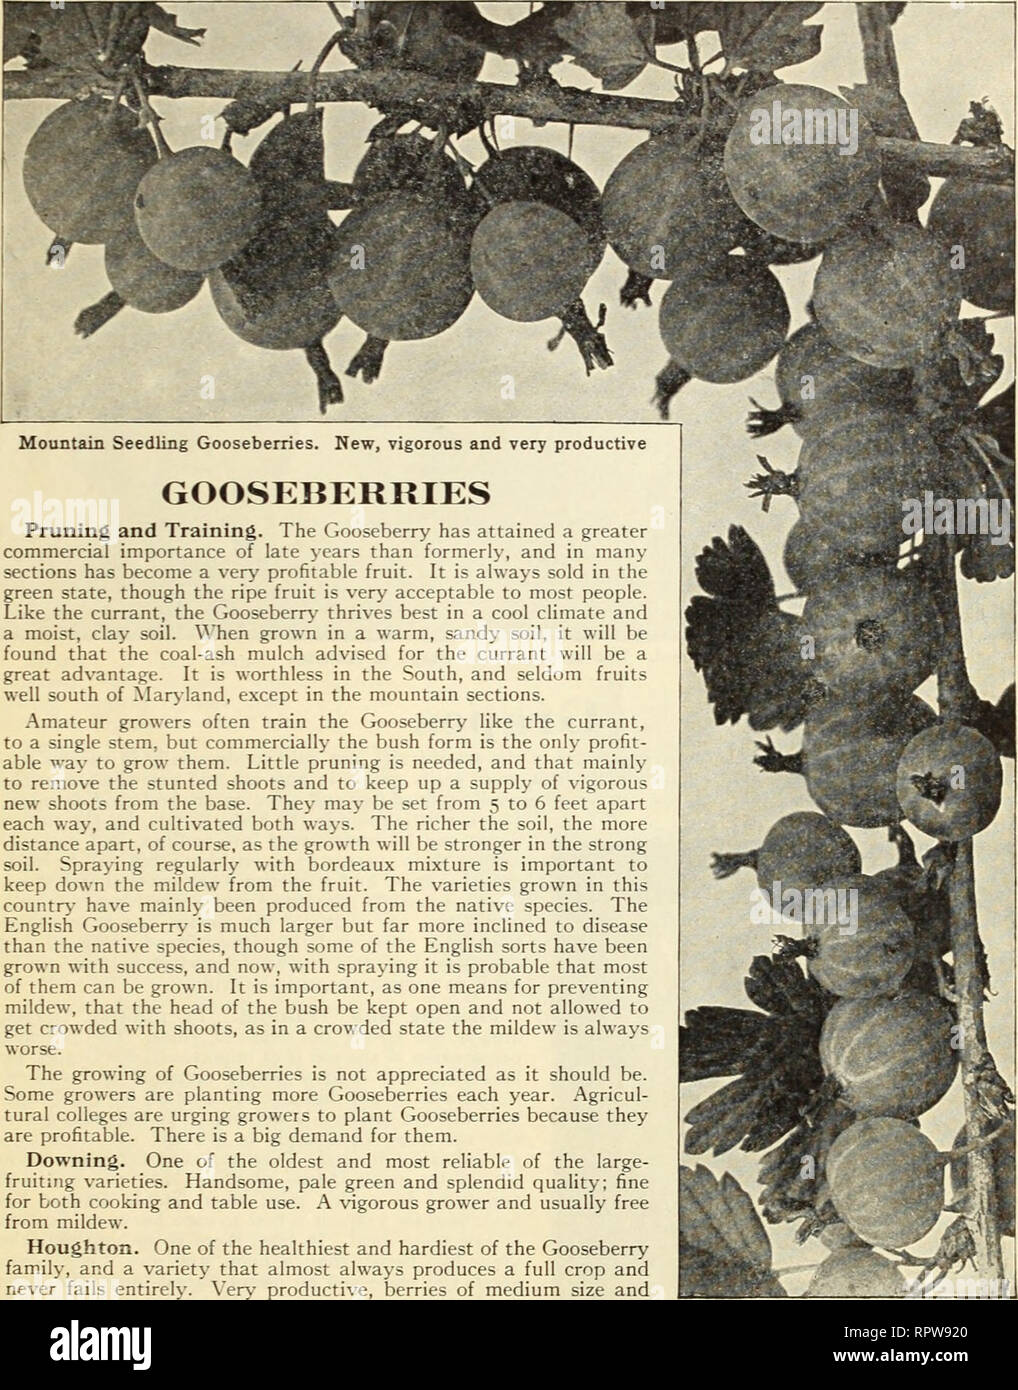 . Allen's book of berries : 1913. Nurseries (Horticulture) Maryland Salisbury Catalogs; Nursery stock Maryland Salisbury Catalogs; Strawberries Maryland Salisbury Catalogs. True-to-Name Small-Fruit Plants 31. Pruning and Training. The Gooseberry has attained a greater commercial importance of late years than formerly, and in many sections has become a very profitable fruit. It is always sold in the green state, though the ripe fruit is very acceptable to most people. Like the currant, the Gooseberry thrives best in a cool climate and a moist, clay soil. When grown in a warm, sandy soil, it wil Stock Photo